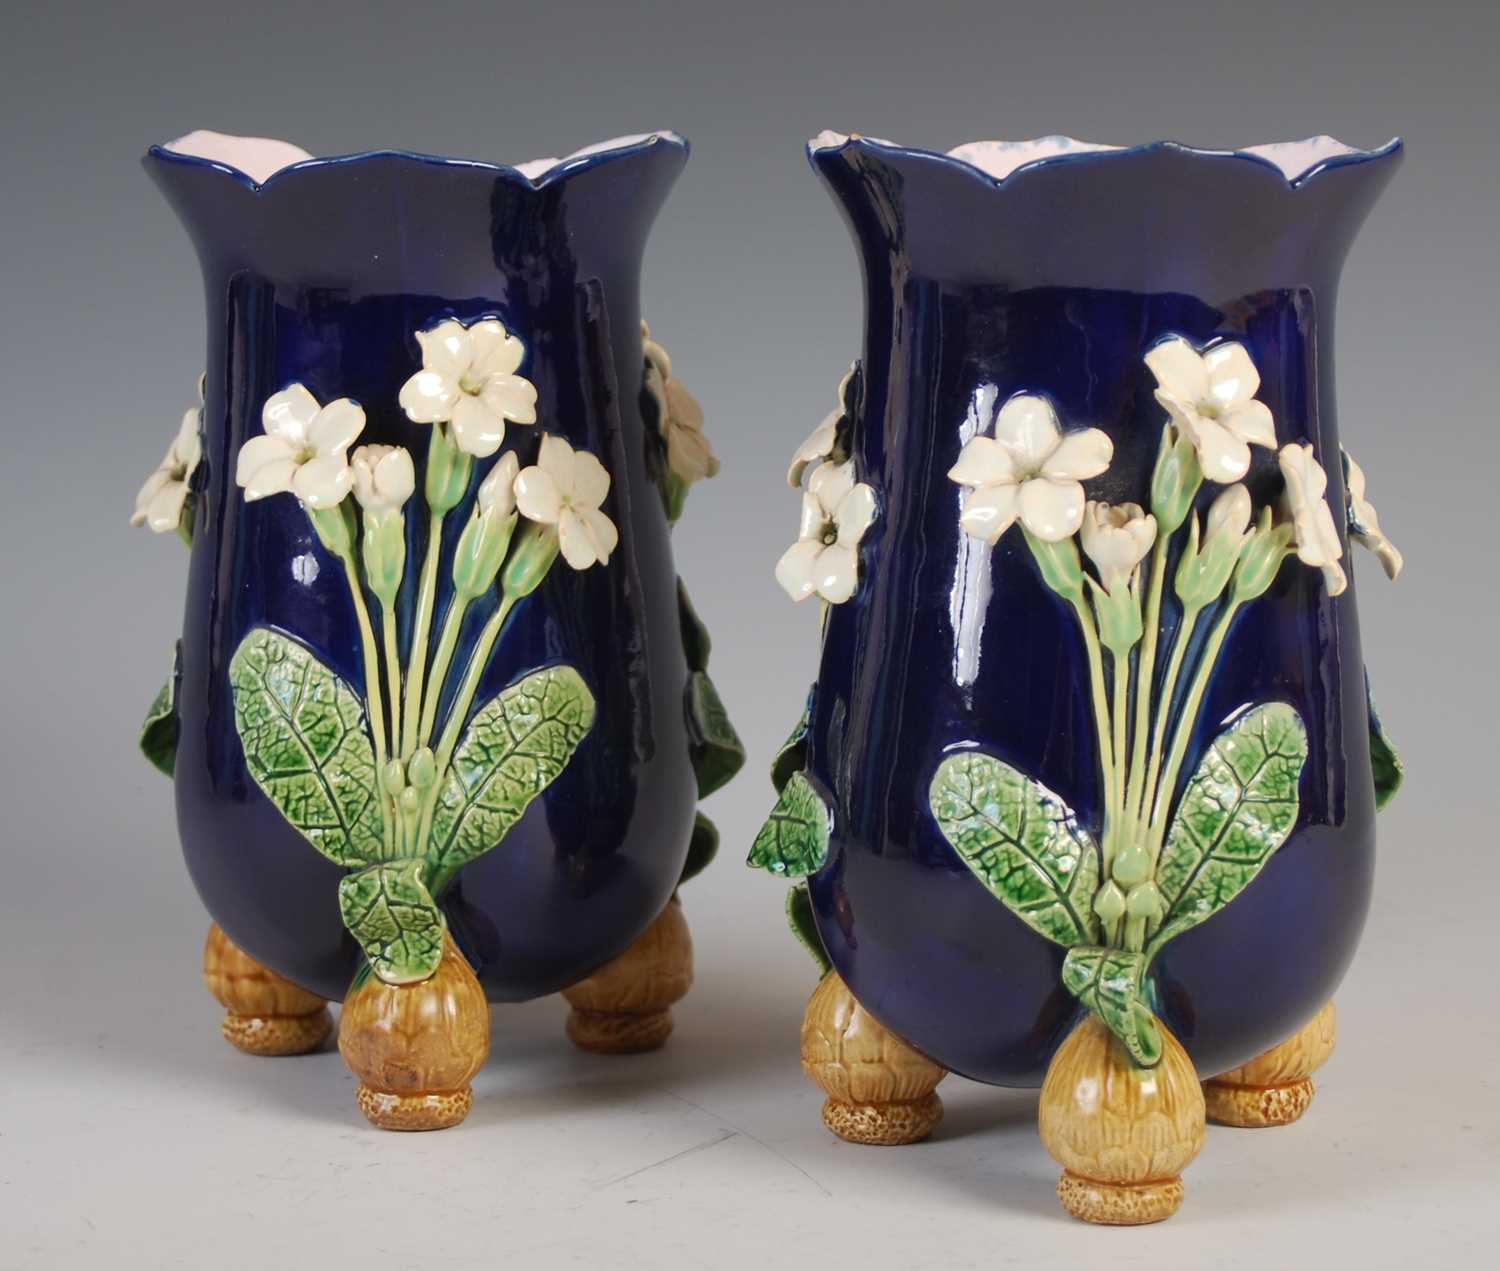 A pair of Minton Majolica pottery vases, dated 1866, decorated in relief with three white petalled